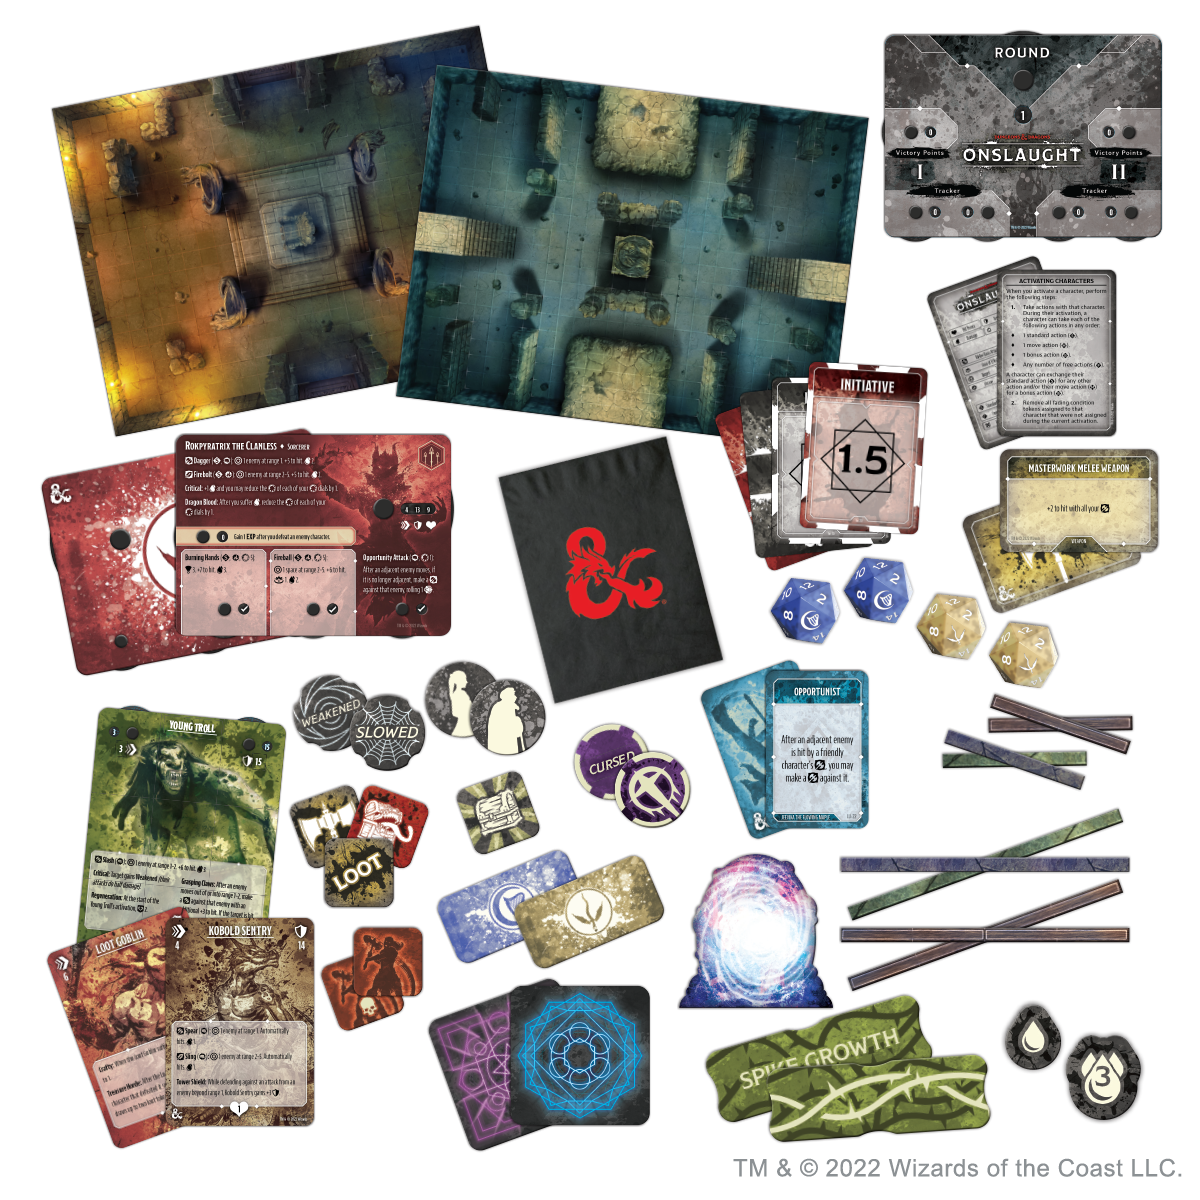 Dungeons & Dragons Onslaught Core Set Board Games CMON   